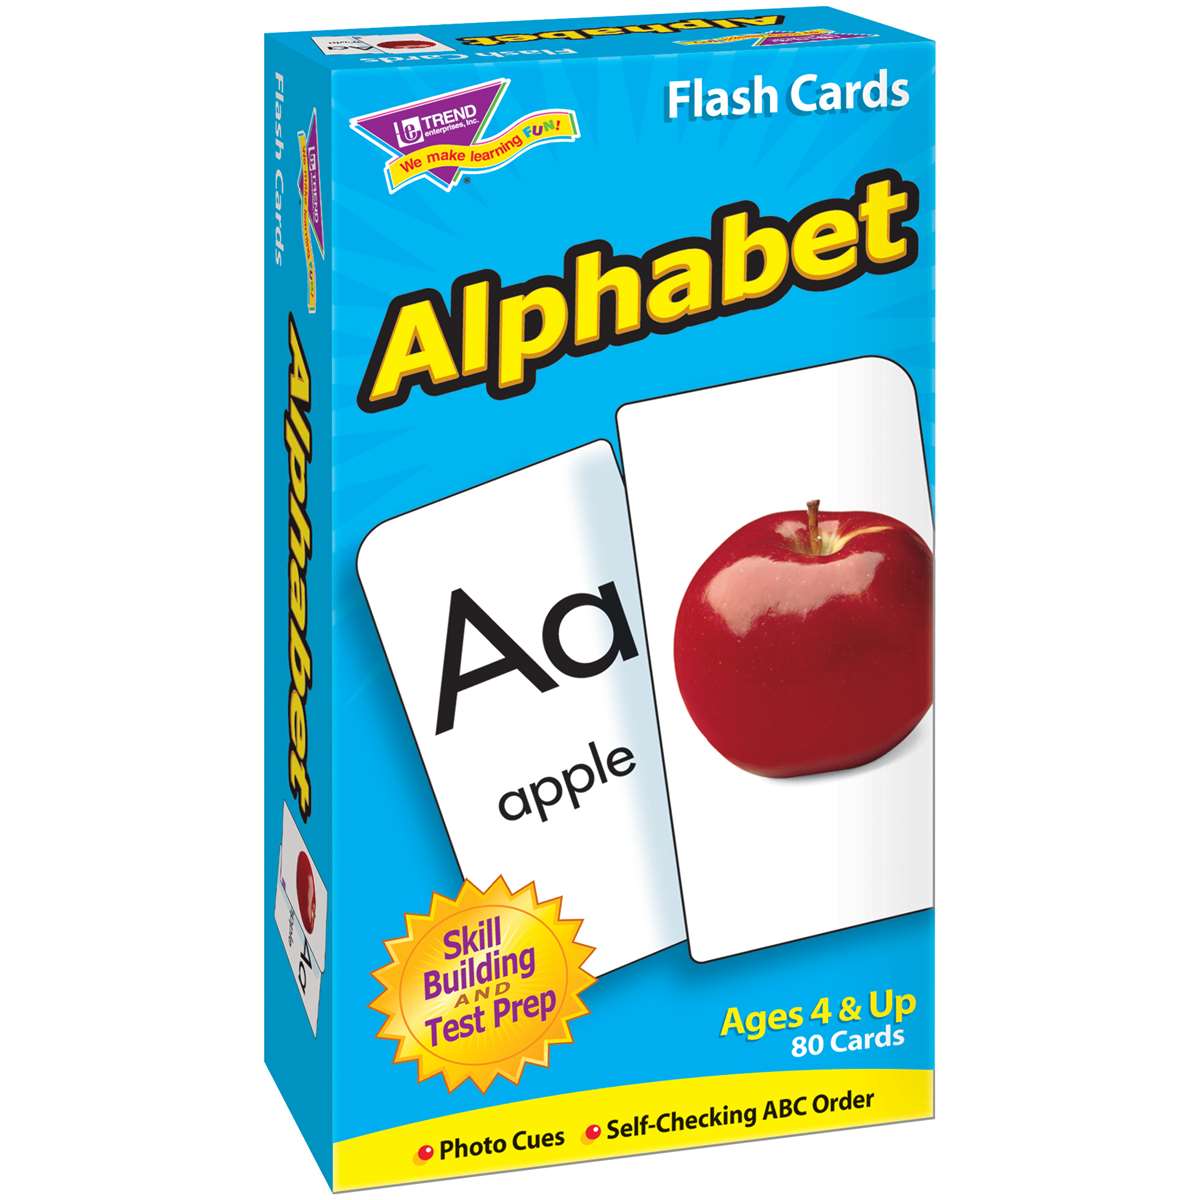 Flash card boxes on